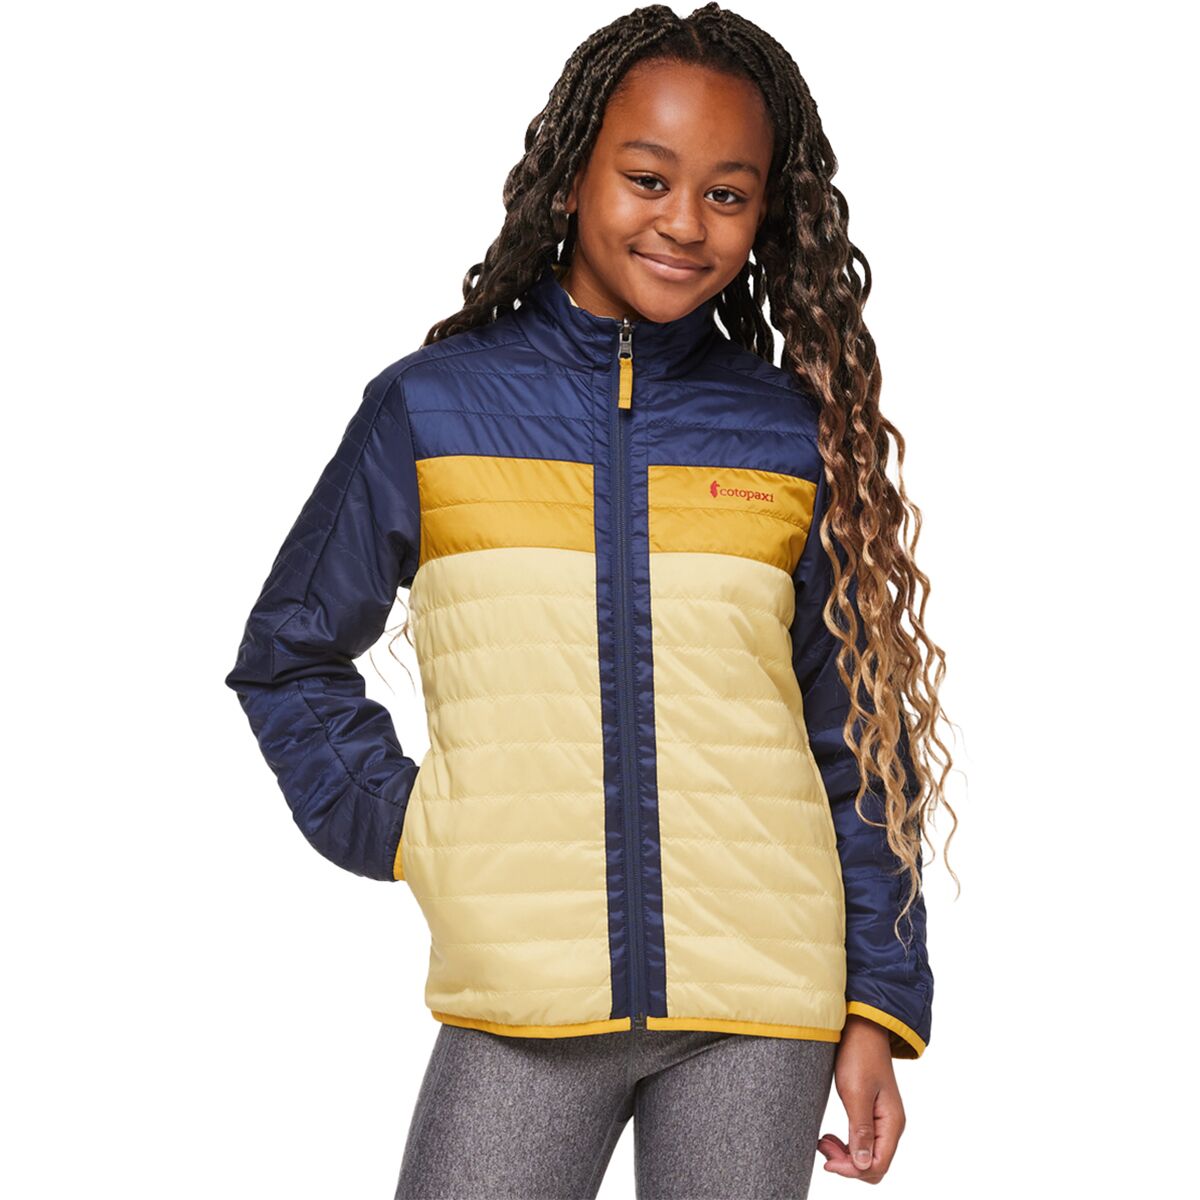 Cotopaxi Capa Insulated Jacket - Kids'